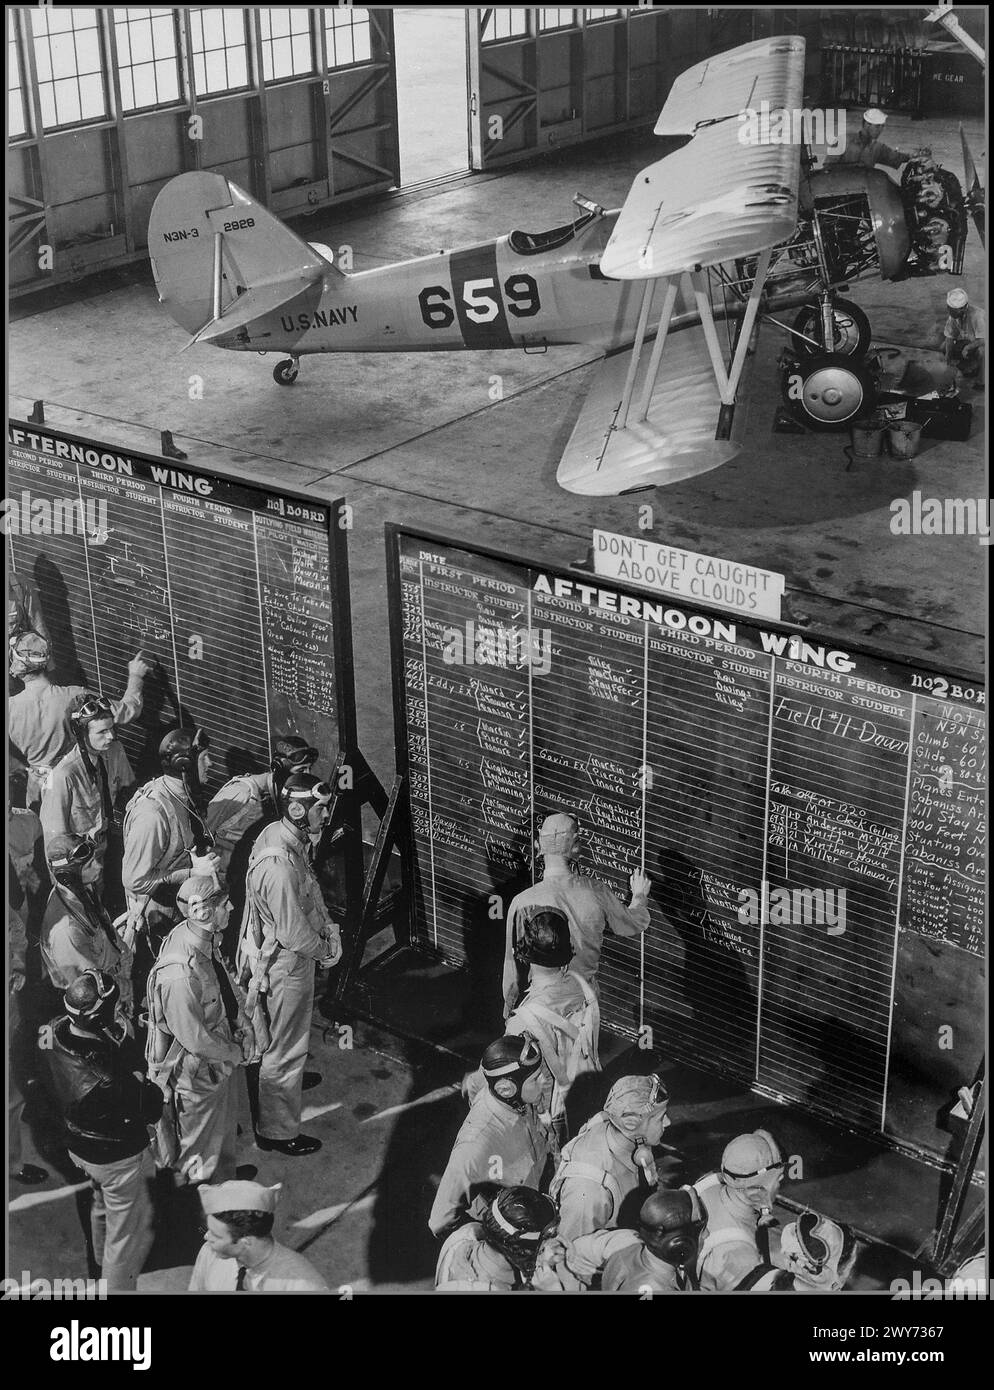 WW2 1942 USA Cadets of the American aviation school at the Naval Air Station Corpus Christi at the training flight schedule. In the background of the photo is a Naval Aircraft Factory N3N-3 training aircraft (serial number 2928, tail number 659). Schedule training blackboards, with cautionary message 'DONT GET CAUGHT ABOVE THE CLOUDS'  Corpus Christi USA Stock Photo